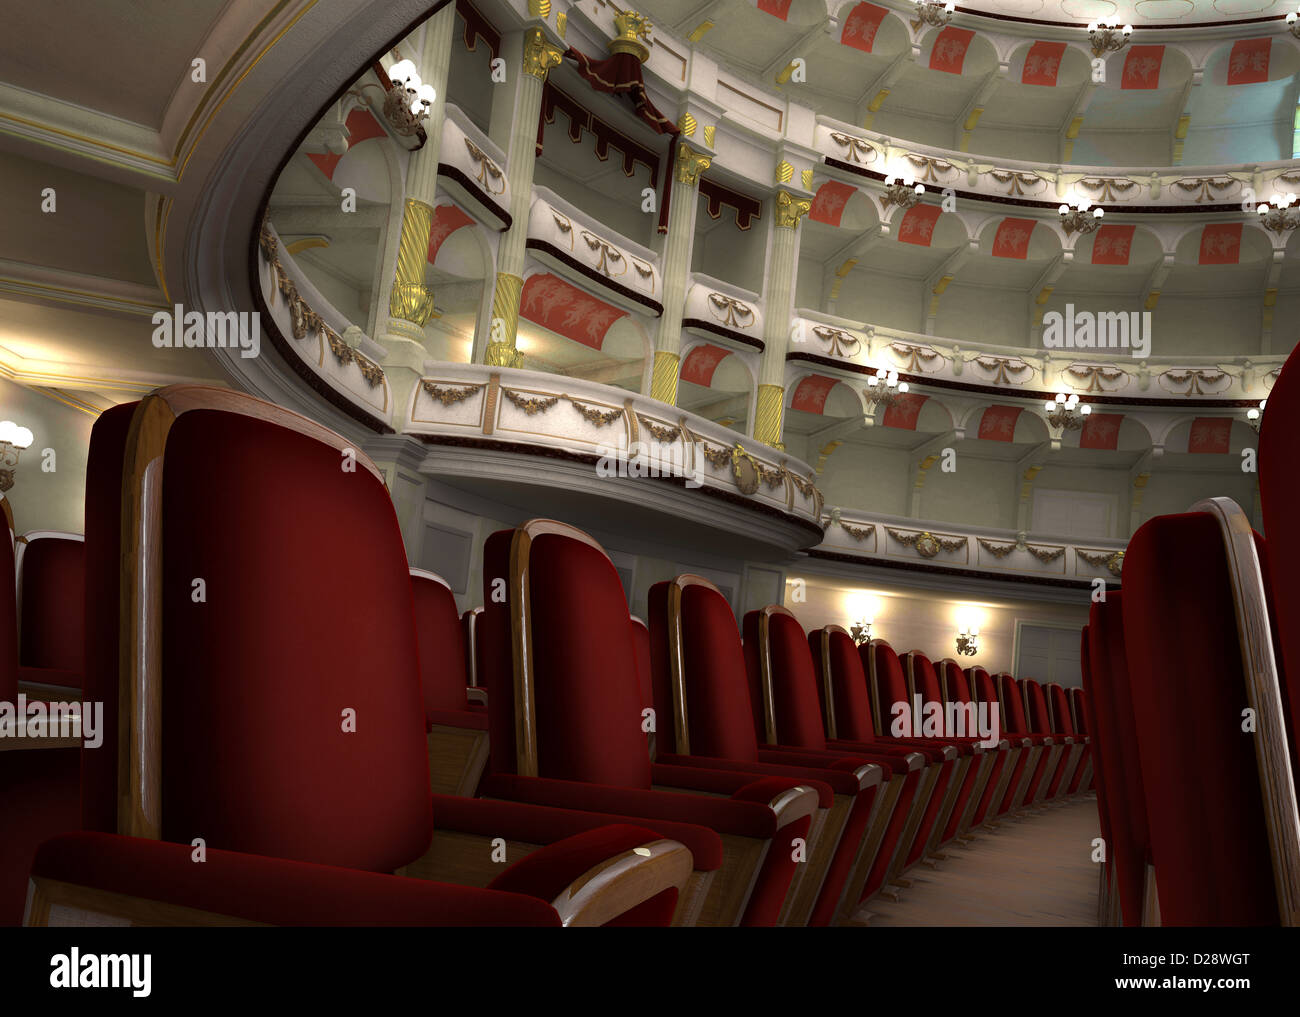 Classic Theater interior, with balconies and chair rows in the foreground. Stock Photo